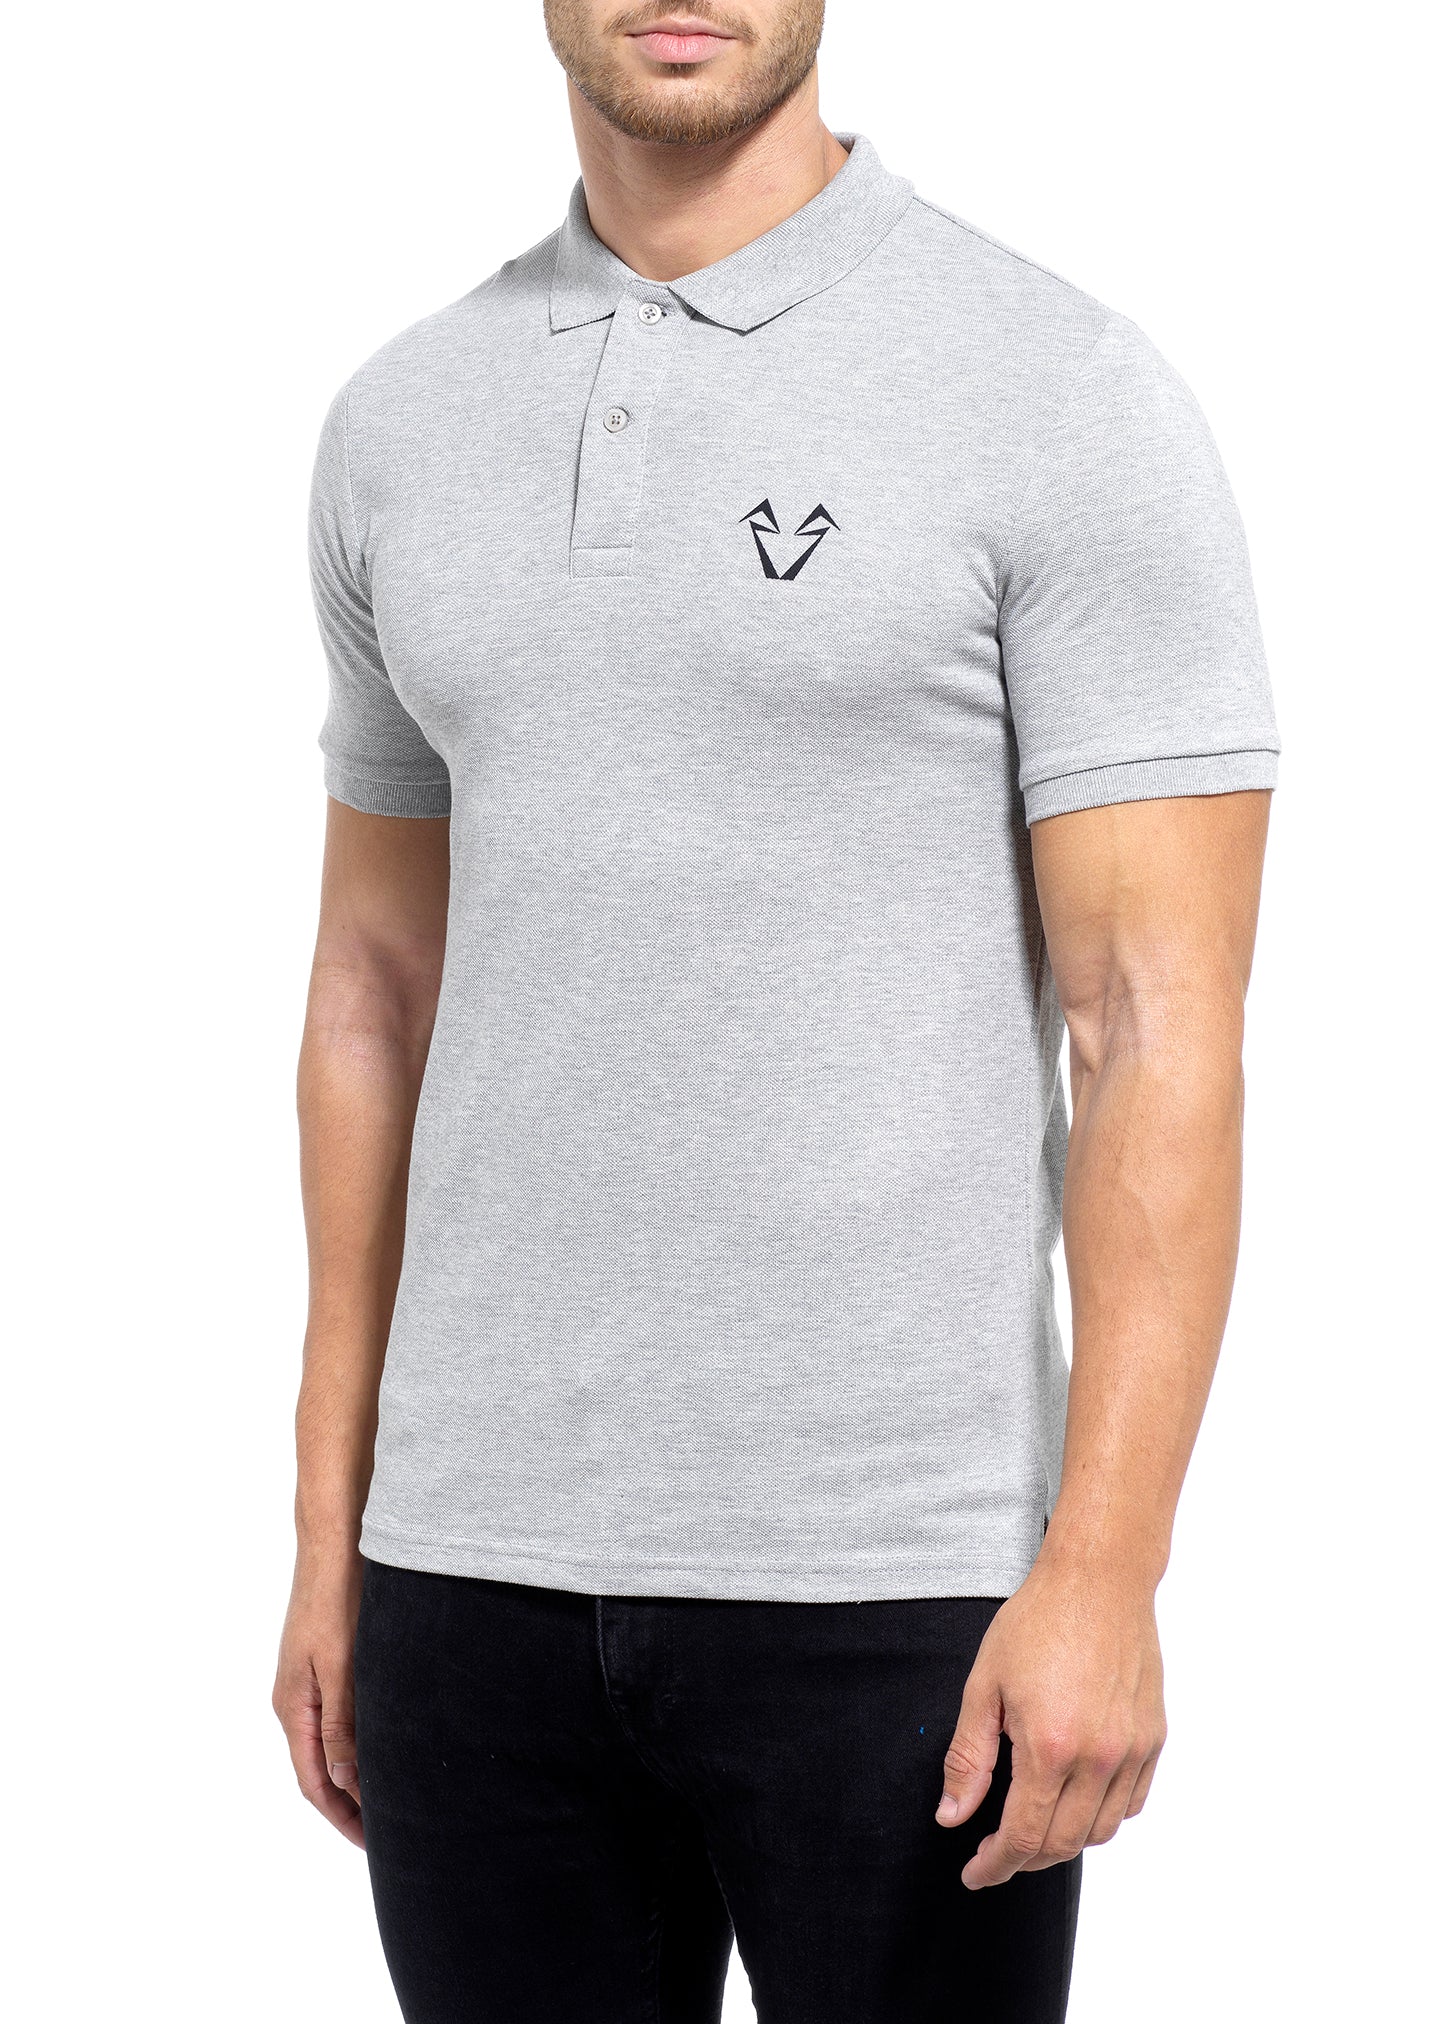 Muscle Fit Grey Shirts